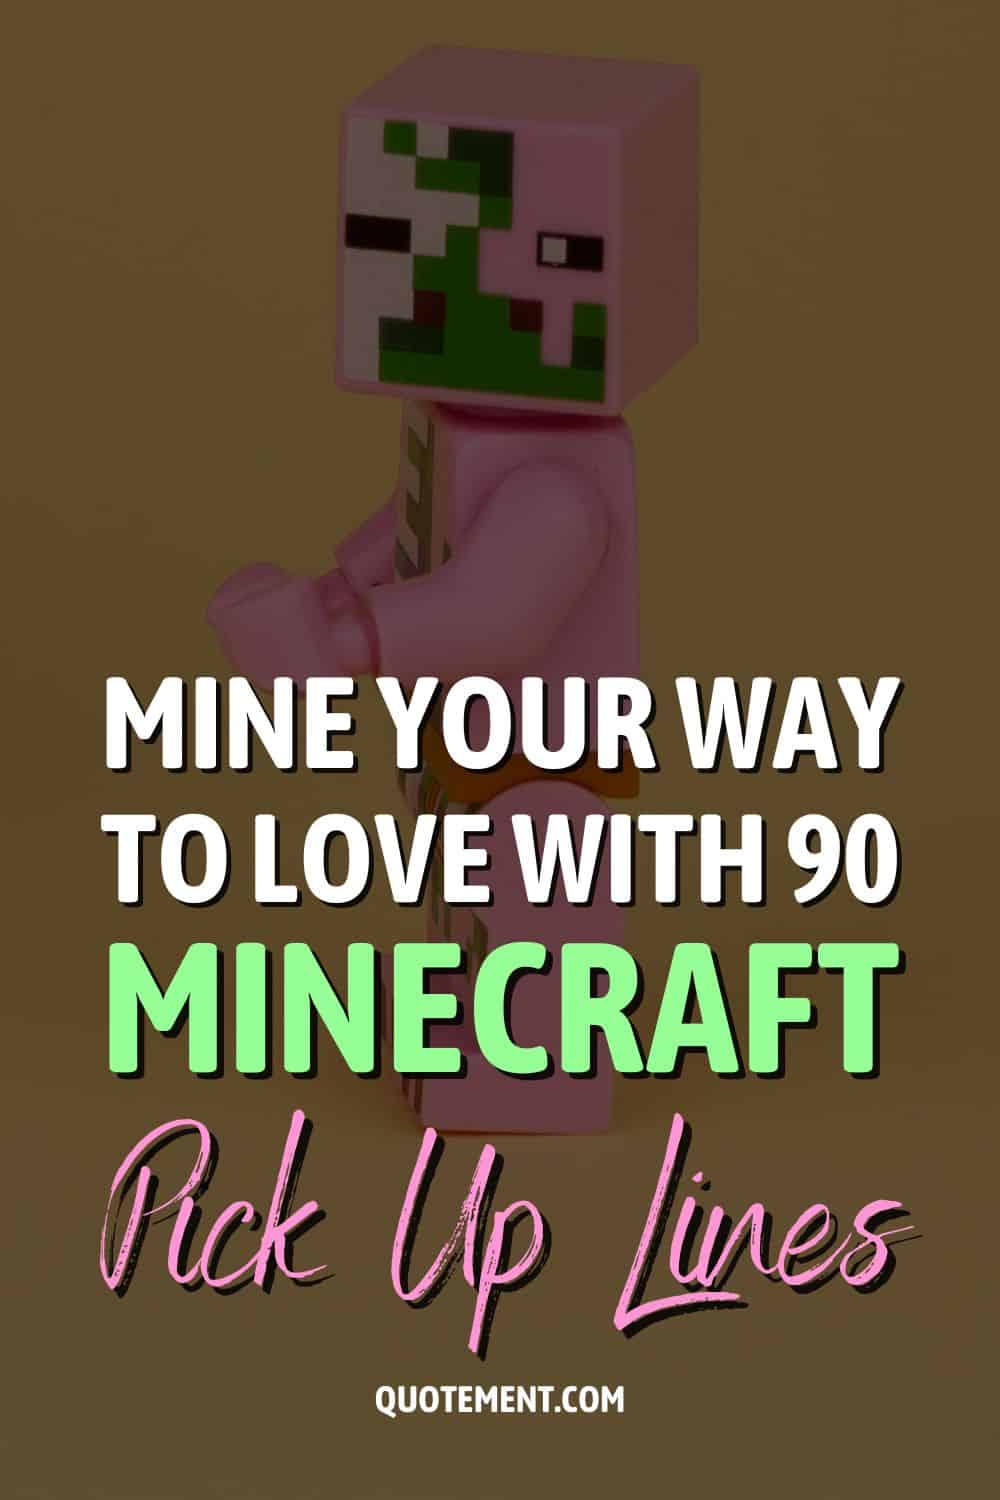 Mine Your Way to Love with 90 Minecraft Pick Up Lines
